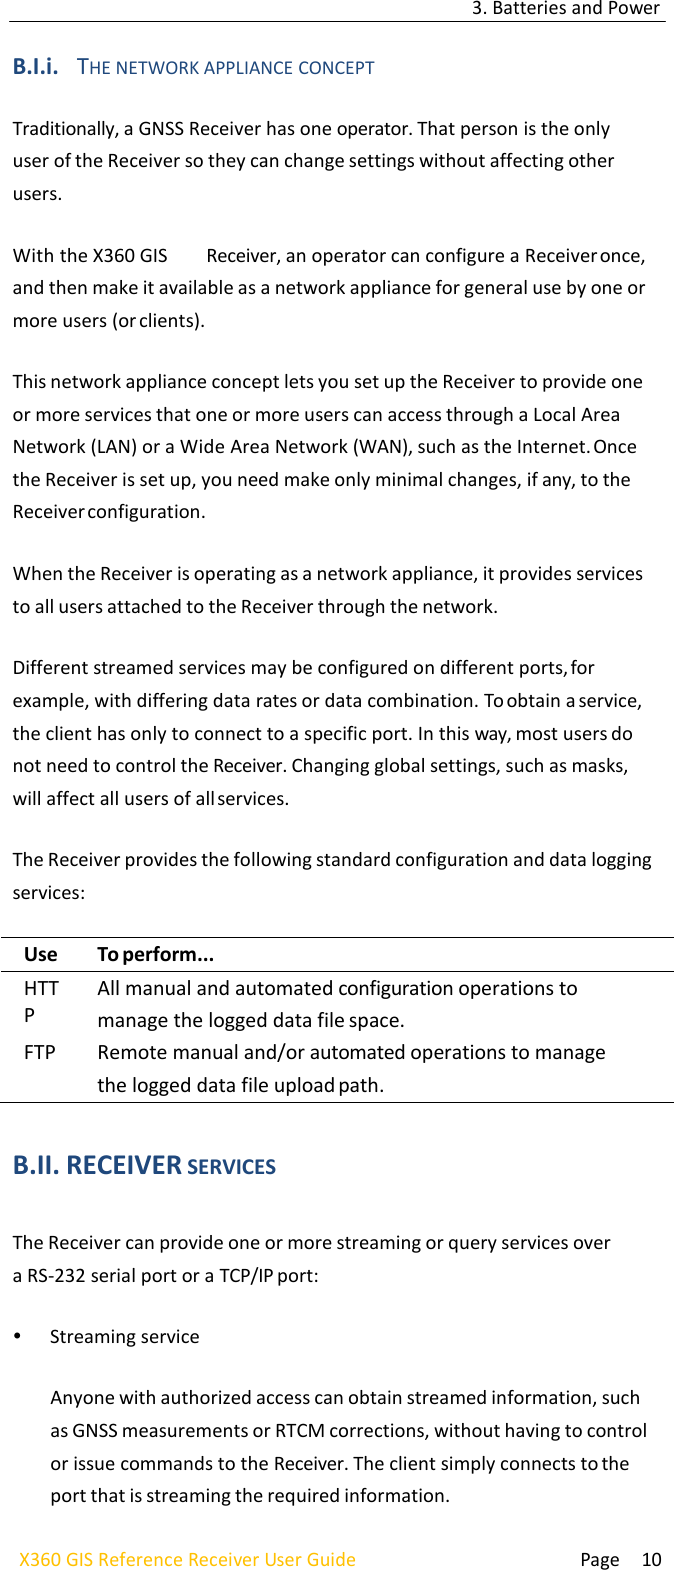 3. Batteries and Power  Page 10 X360 GIS Reference Receiver User Guide    B.I.i. THE NETWORK APPLIANCE CONCEPT  Traditionally, a GNSS Receiver has one operator. That person is the only user of the Receiver so they can change settings without affecting other users.  With the X360 GIS  Receiver, an operator can configure a Receiver once, and then make it available as a network appliance for general use by one or more users (or clients).  This network appliance concept lets you set up the Receiver to provide one or more services that one or more users can access through a Local Area Network (LAN) or a Wide Area Network (WAN), such as the Internet. Once the Receiver is set up, you need make only minimal changes, if any, to the Receiver configuration.  When the Receiver is operating as a network appliance, it provides services to all users attached to the Receiver through the network.  Different streamed services may be configured on different ports, for example, with differing data rates or data combination. To obtain a service, the client has only to connect to a specific port. In this way, most users do not need to control the Receiver. Changing global settings, such as masks, will affect all users of all services.  The Receiver provides the following standard configuration and data logging services:  Use... To perform... HTTP All manual and automated configuration operations to manage the logged data file space. FTP Remote manual and/or automated operations to manage the logged data file upload path.  B.II. RECEIVER SERVICES  The Receiver can provide one or more streaming or query services over a RS-232 serial port or a TCP/IP port:   Streaming service  Anyone with authorized access can obtain streamed information, such as GNSS measurements or RTCM corrections, without having to control or issue commands to the Receiver. The client simply connects to the port that is streaming the required information. 